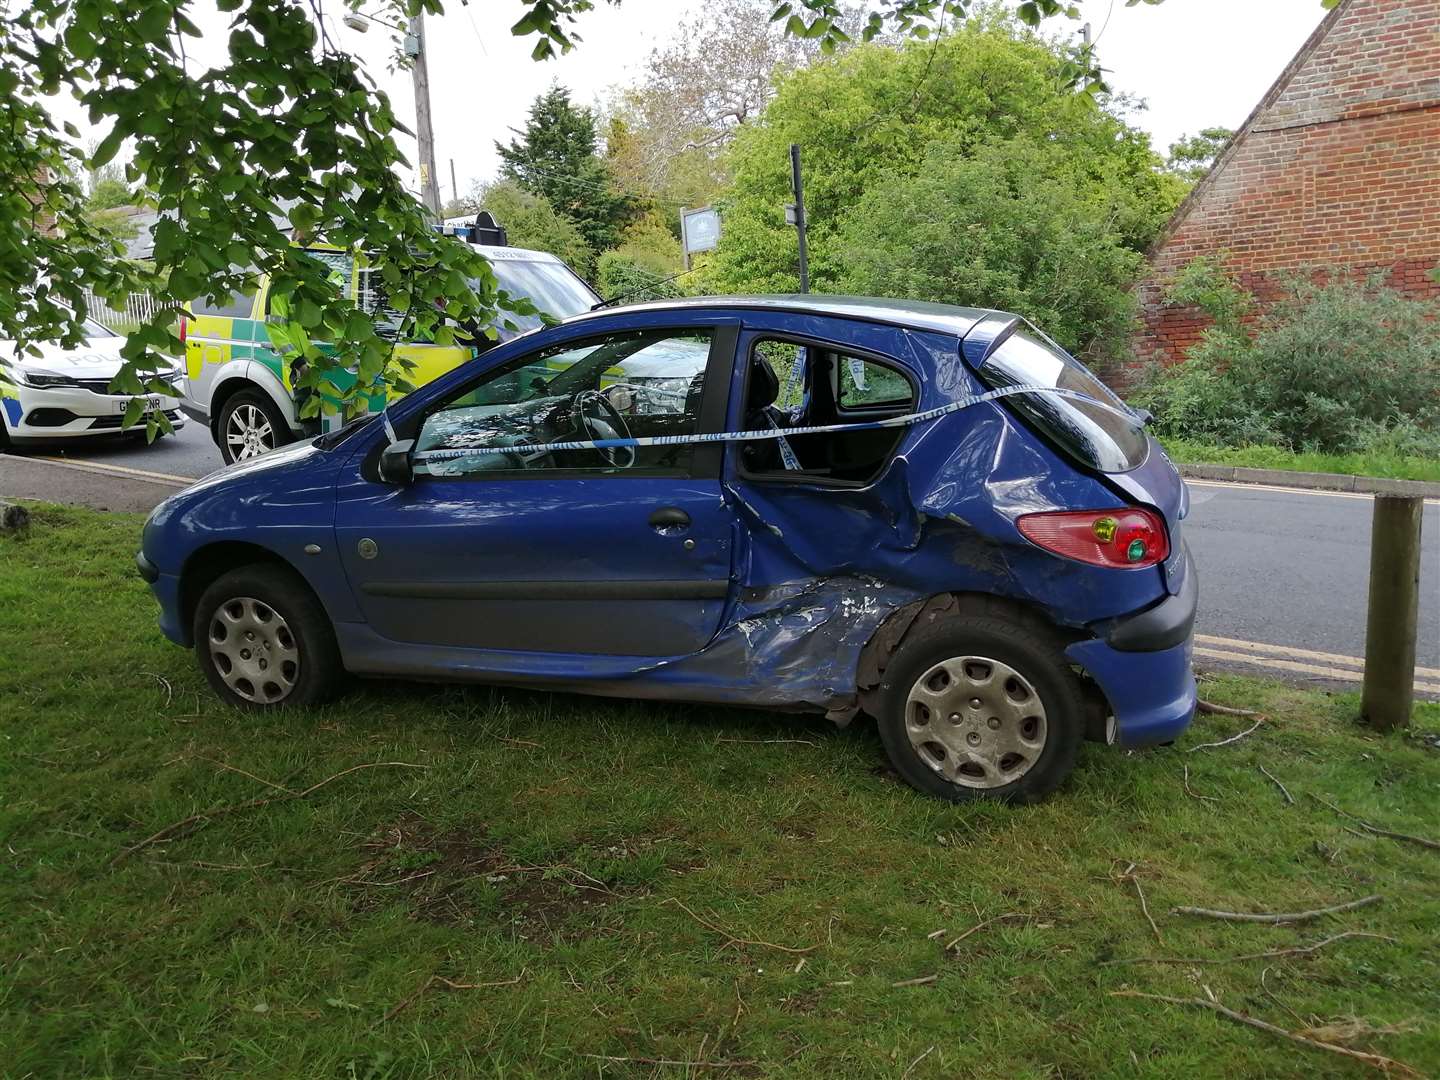 At least two people have been taken to hospital after a crash on the A28